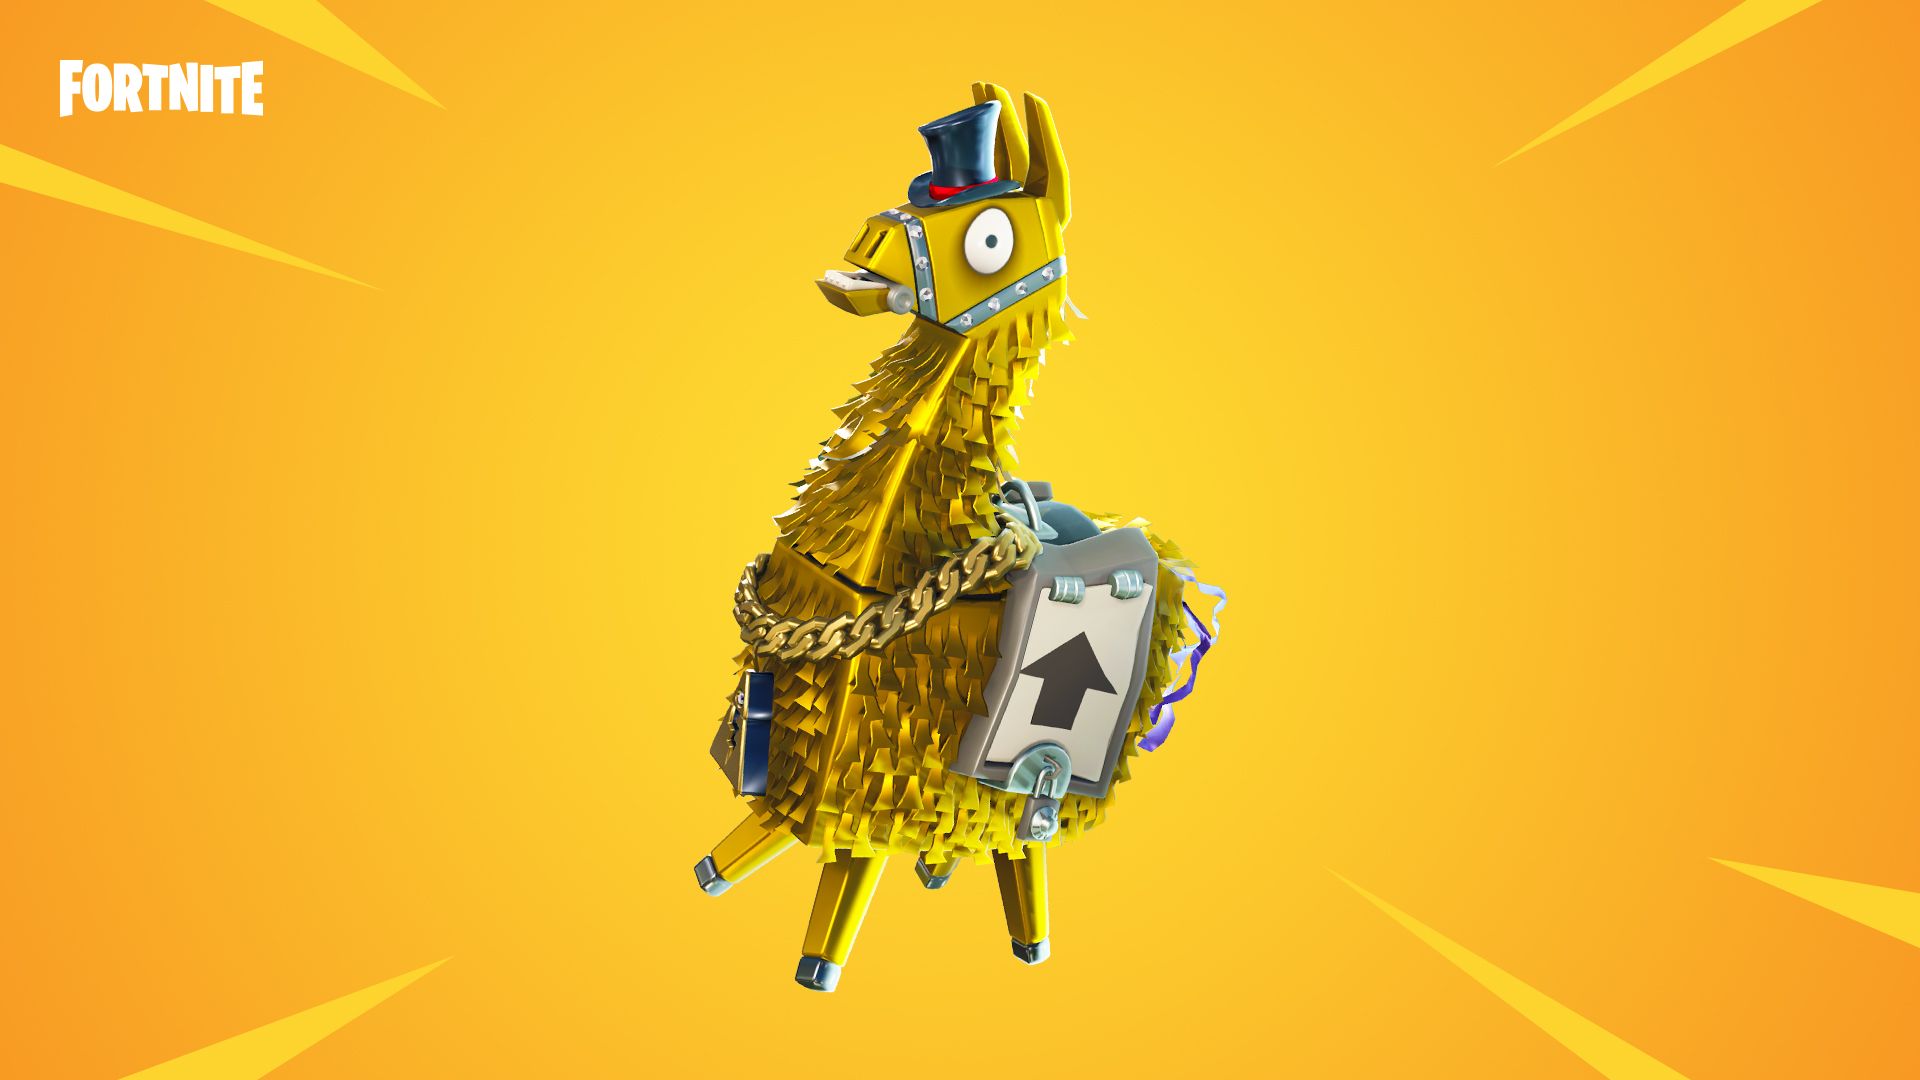 Fortnite a free llama, on us! Be sure to check the store in #SavetheWorld for a free Smorgasbord llama